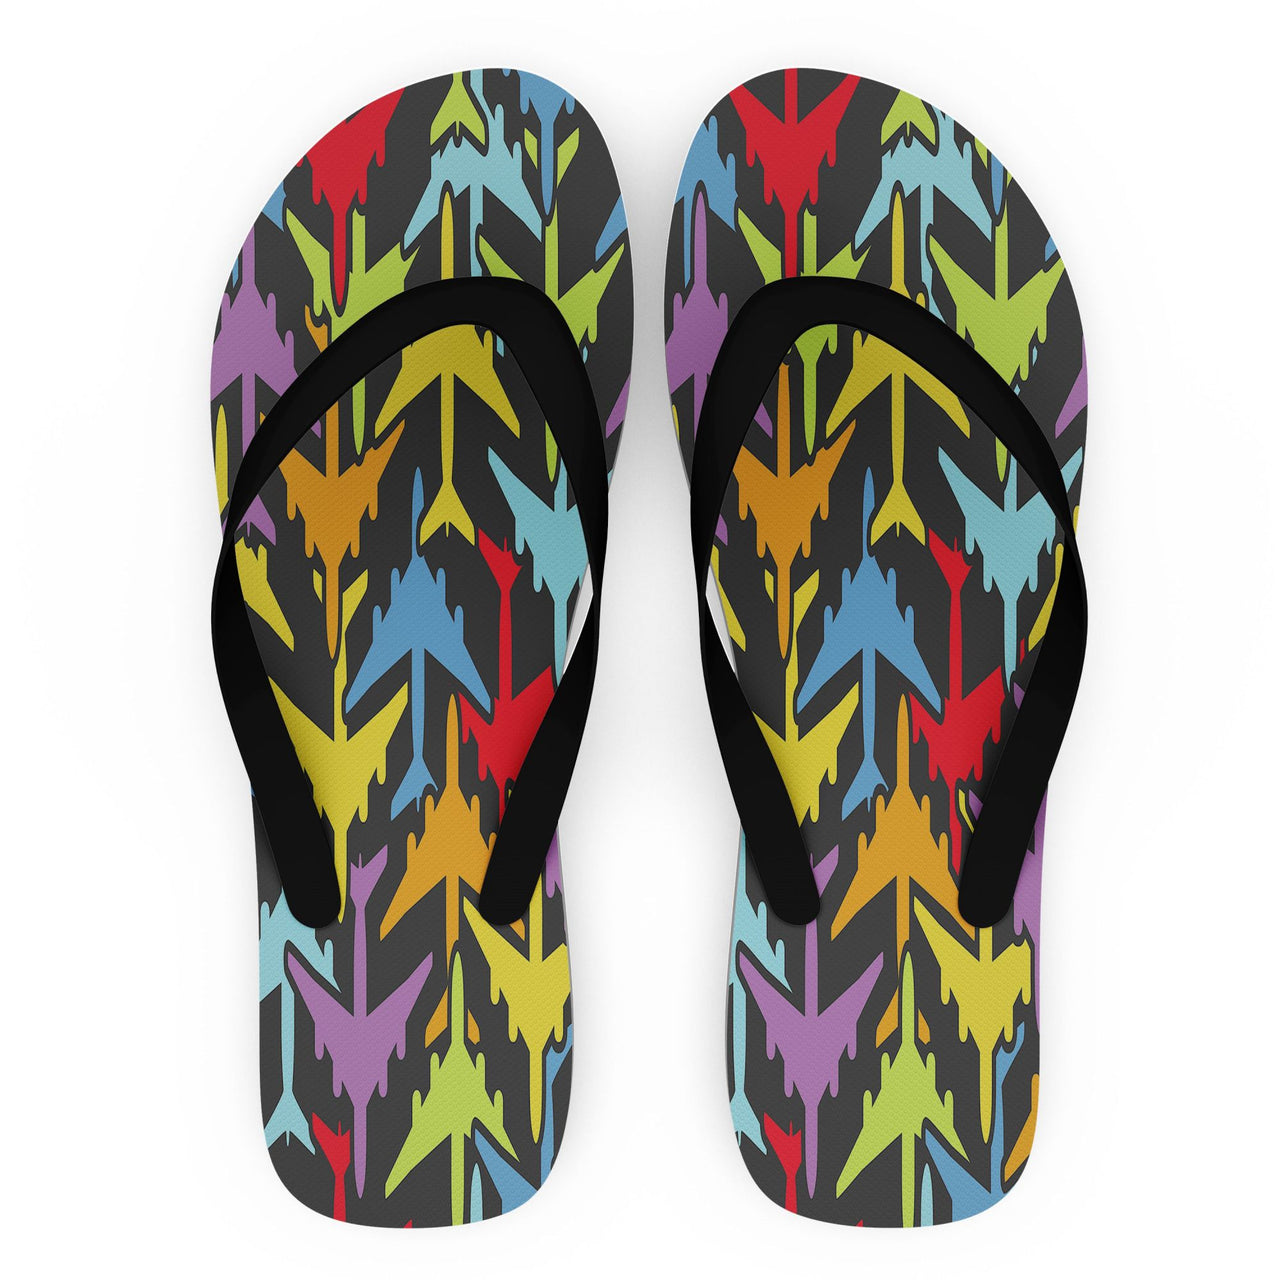 Super Colourful Airplanes Designed Slippers (Flip Flops)